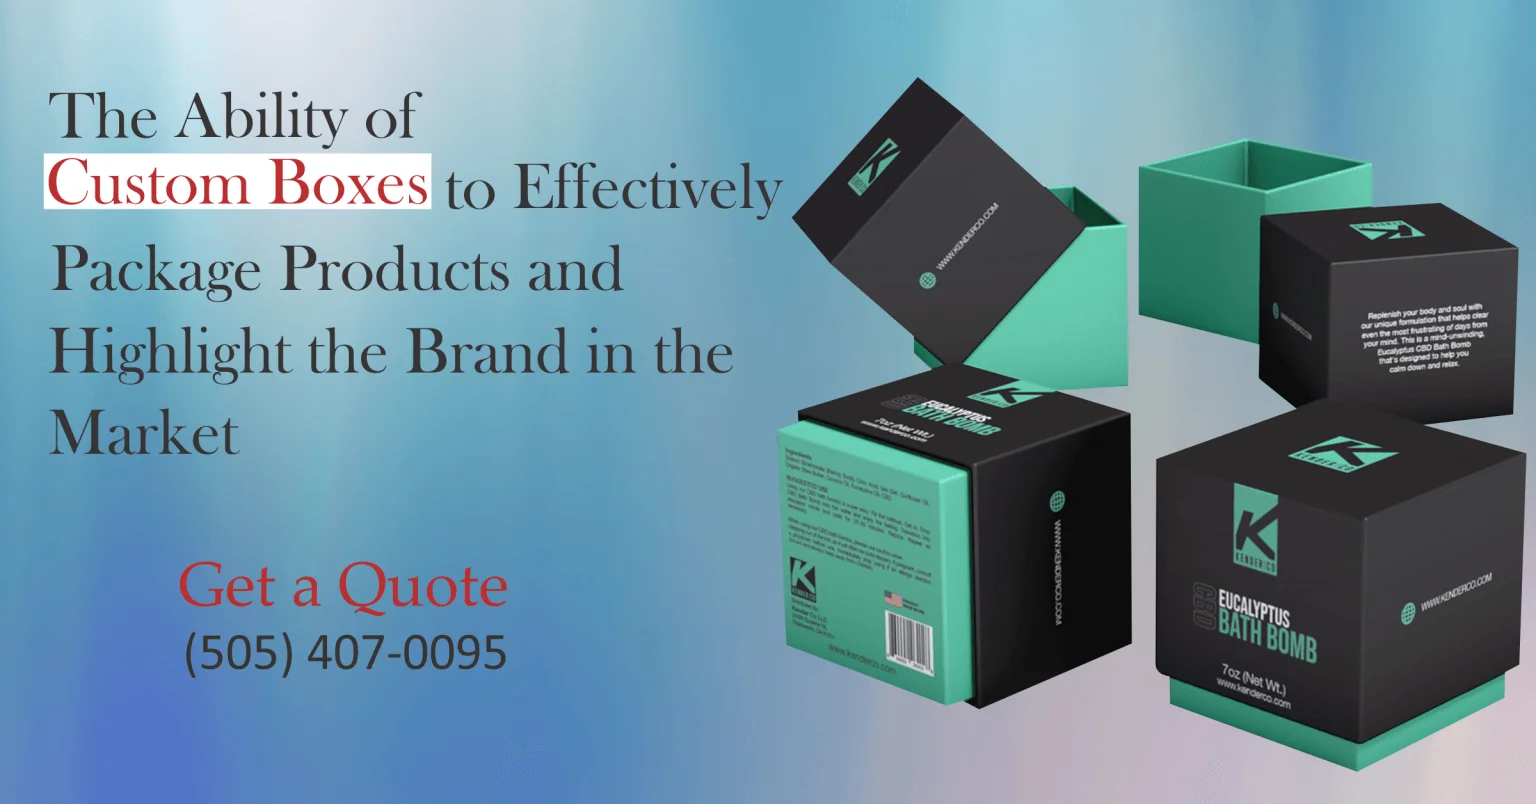 The Ability of Custom Boxes to Effectively Package Products and Highlight the Brand in the Market